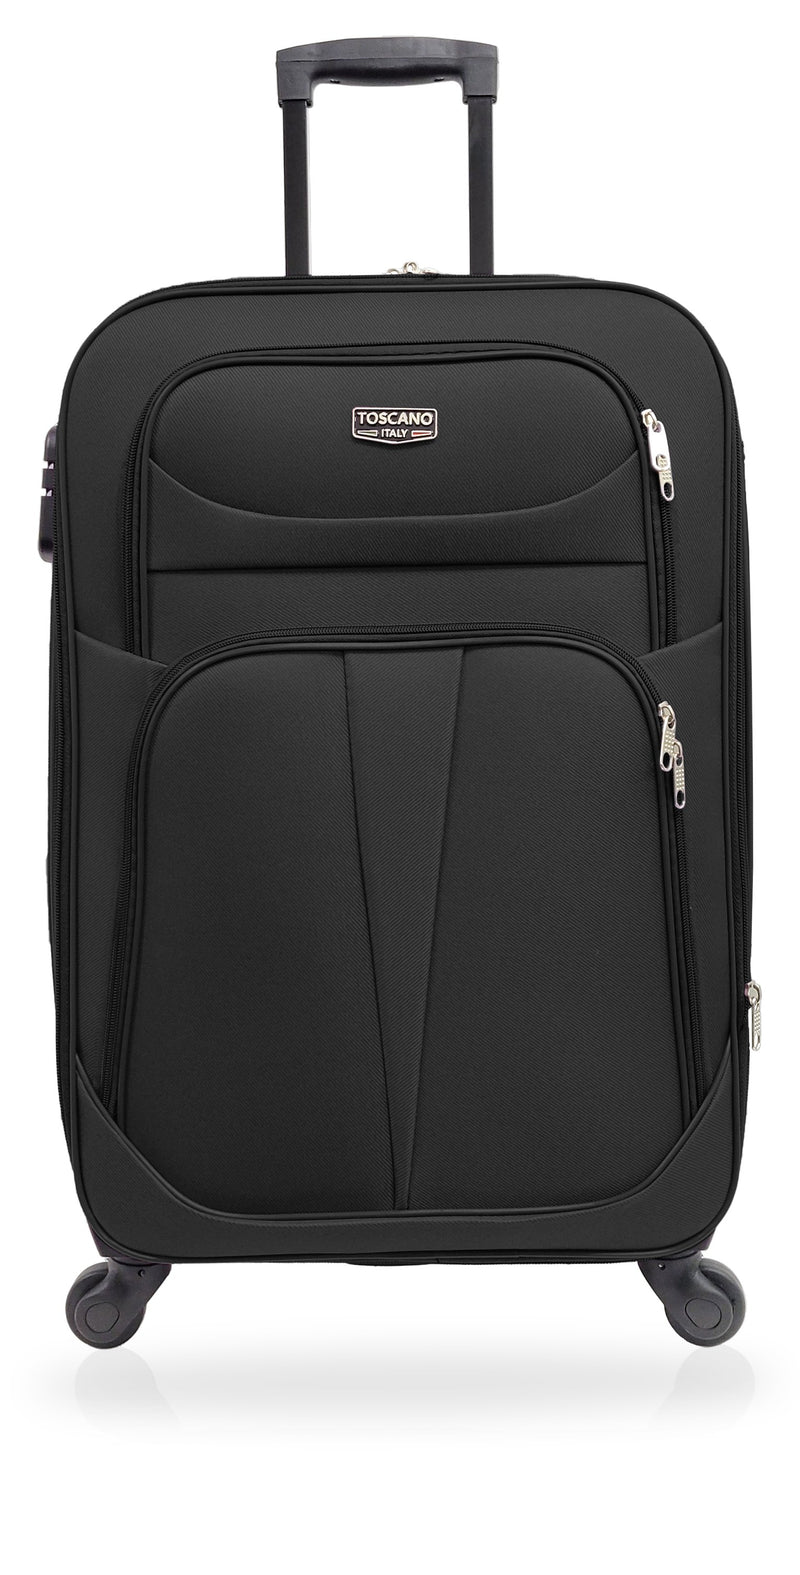 TOSCANO by Tucci 28-inch Parata Lightweight Luggage Suitcase